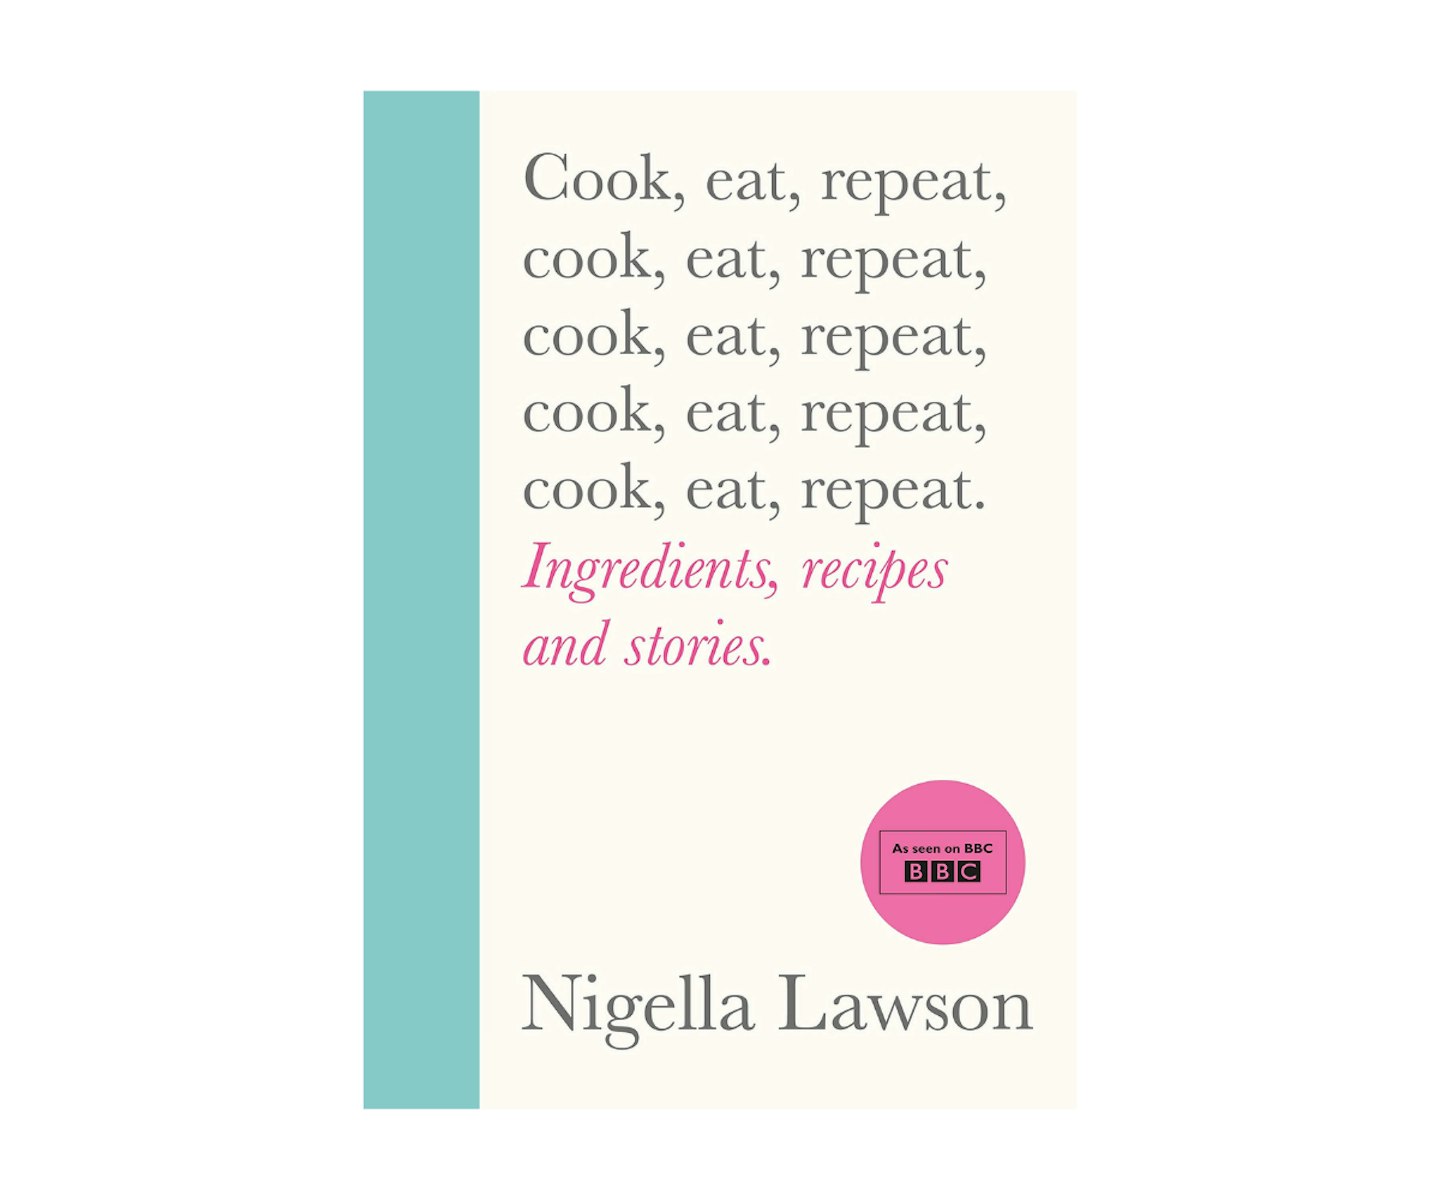 Cook, Eat, Repeat by Nigella Lawson